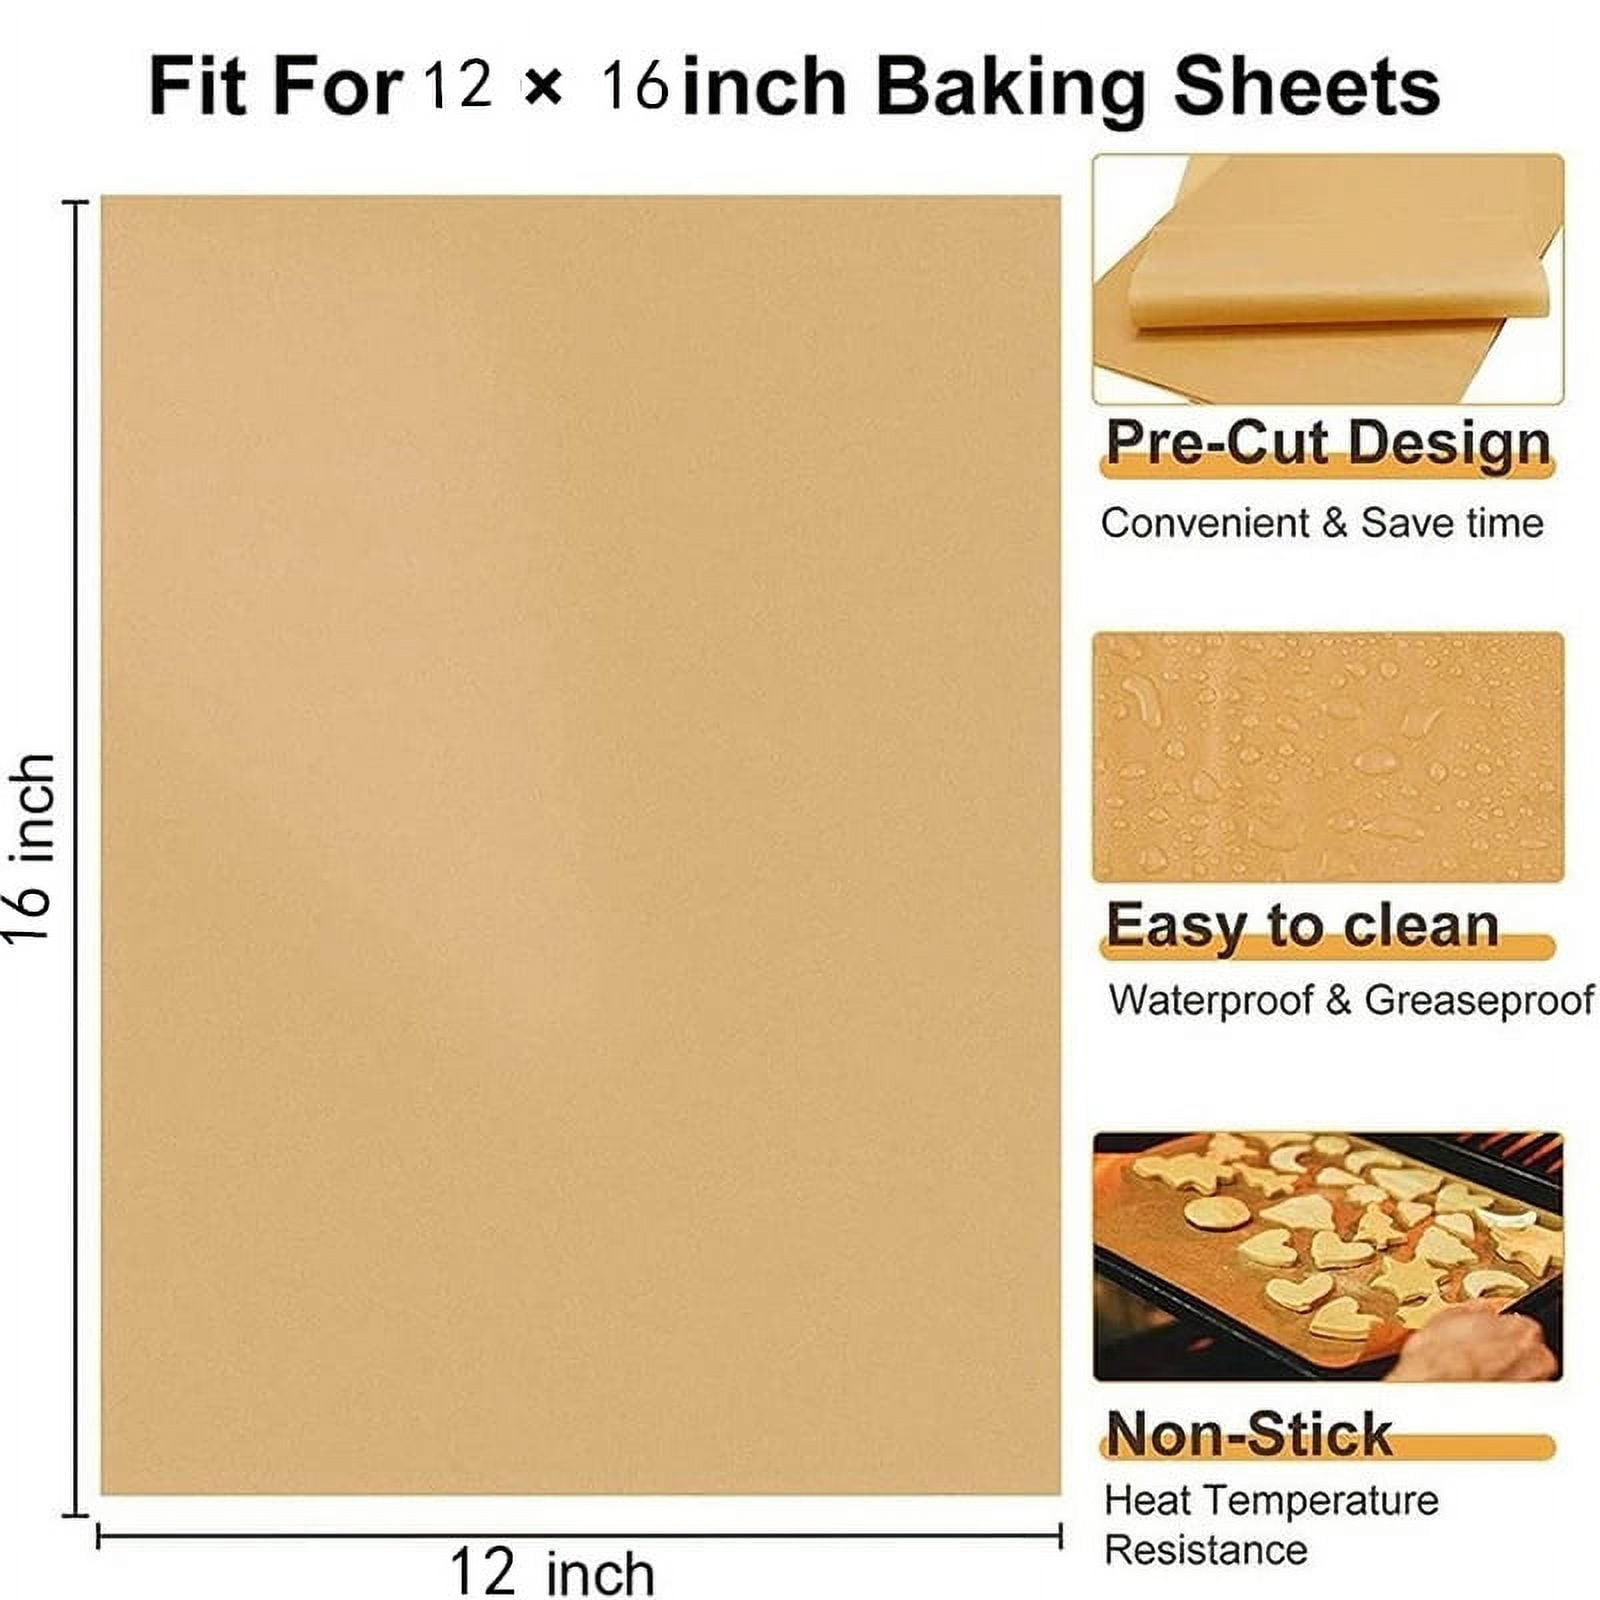 220 Pcs 12x16 In Parchment Paper Sheets, Baklicious Pre-cut Non-Stick  Parchment Baking Paper for Air Fryer, Oven, Bakeware, Steaming, Cooking  Bread